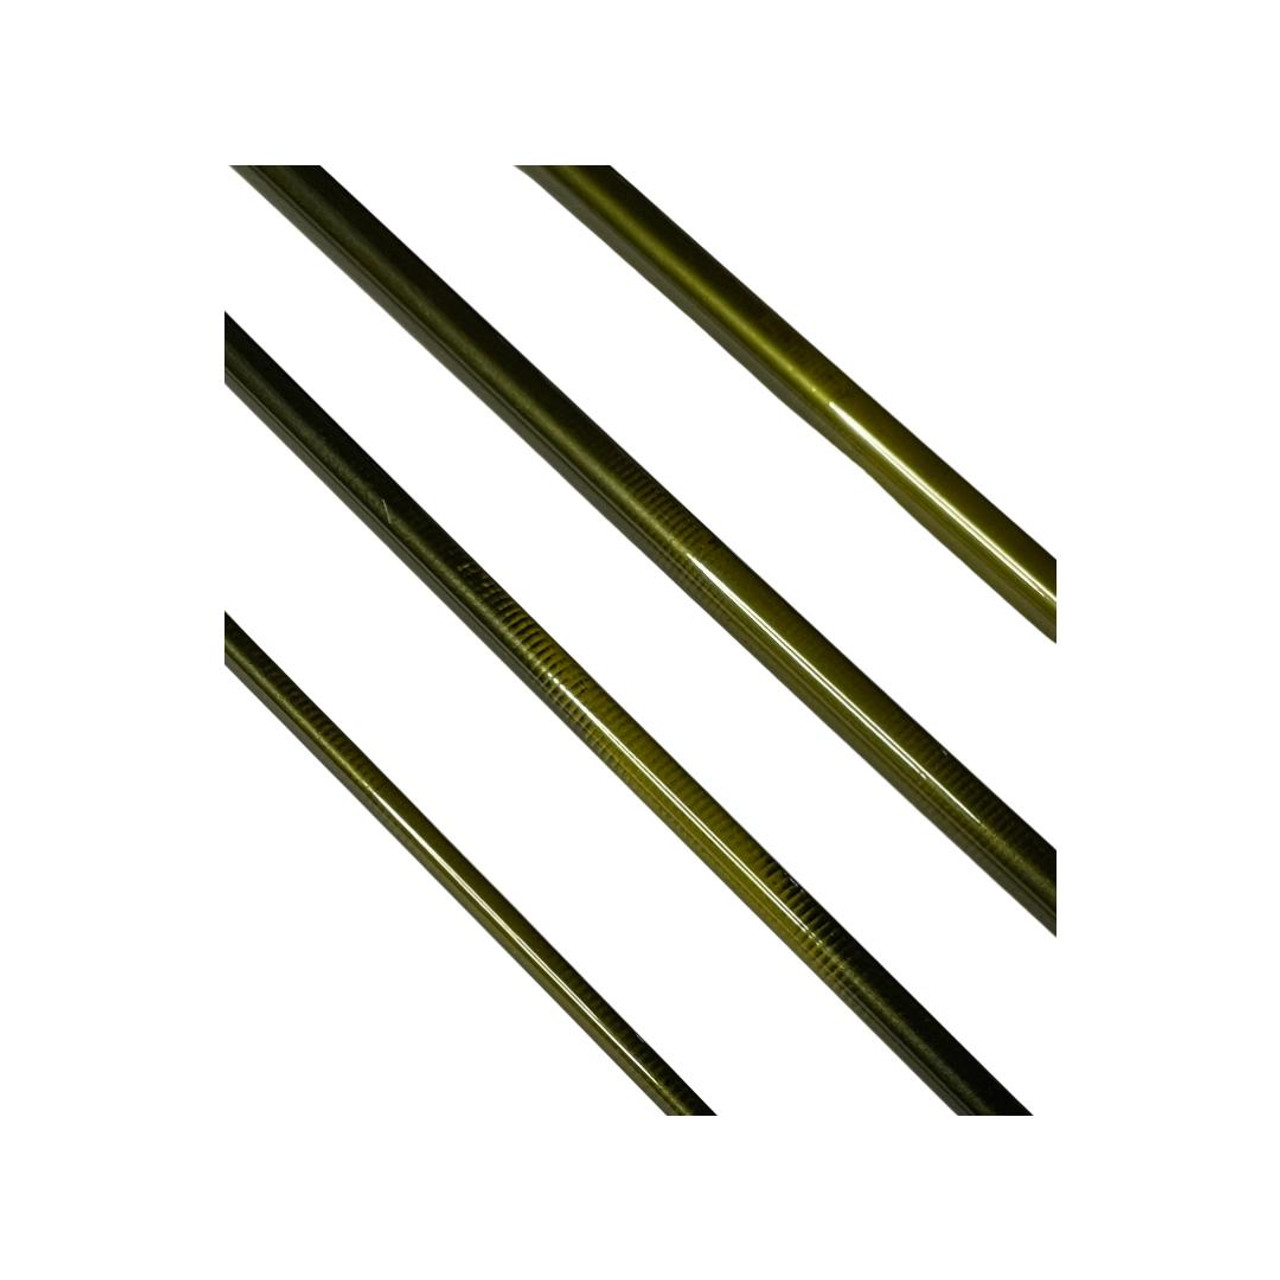 https://cdn11.bigcommerce.com/s-optetoawga/images/stencil/1280x1280/products/539/2876/gb-fly-shop-golden-olive-green-12-67wt-4pc-spey-rod-blank__05817.1678917823.jpg?c=2